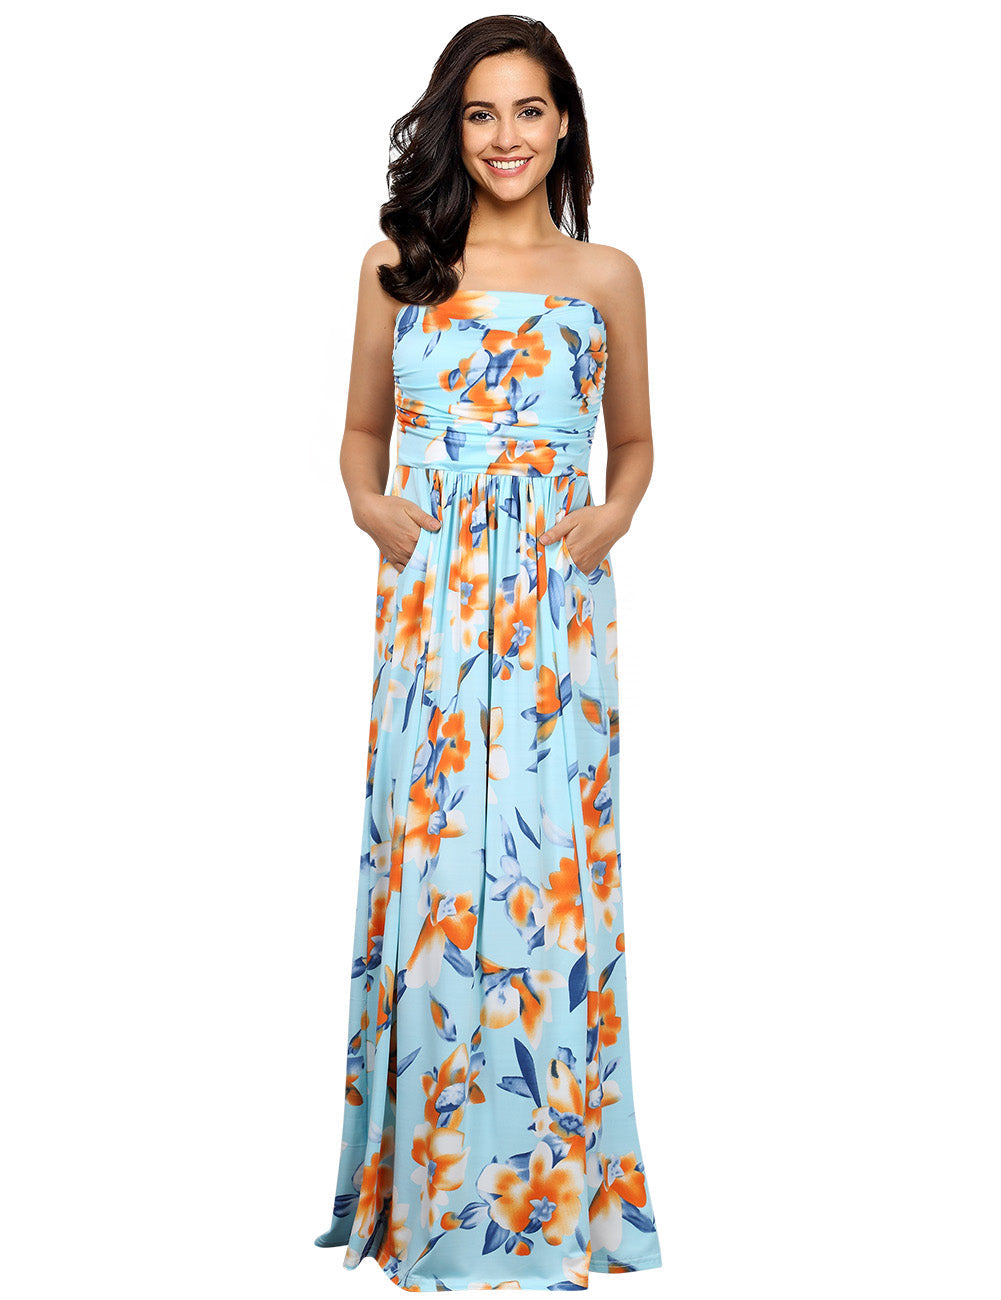 YESFASHION Women Ruched Strapless Maxi Vintage Floral Print Long Dress Blue